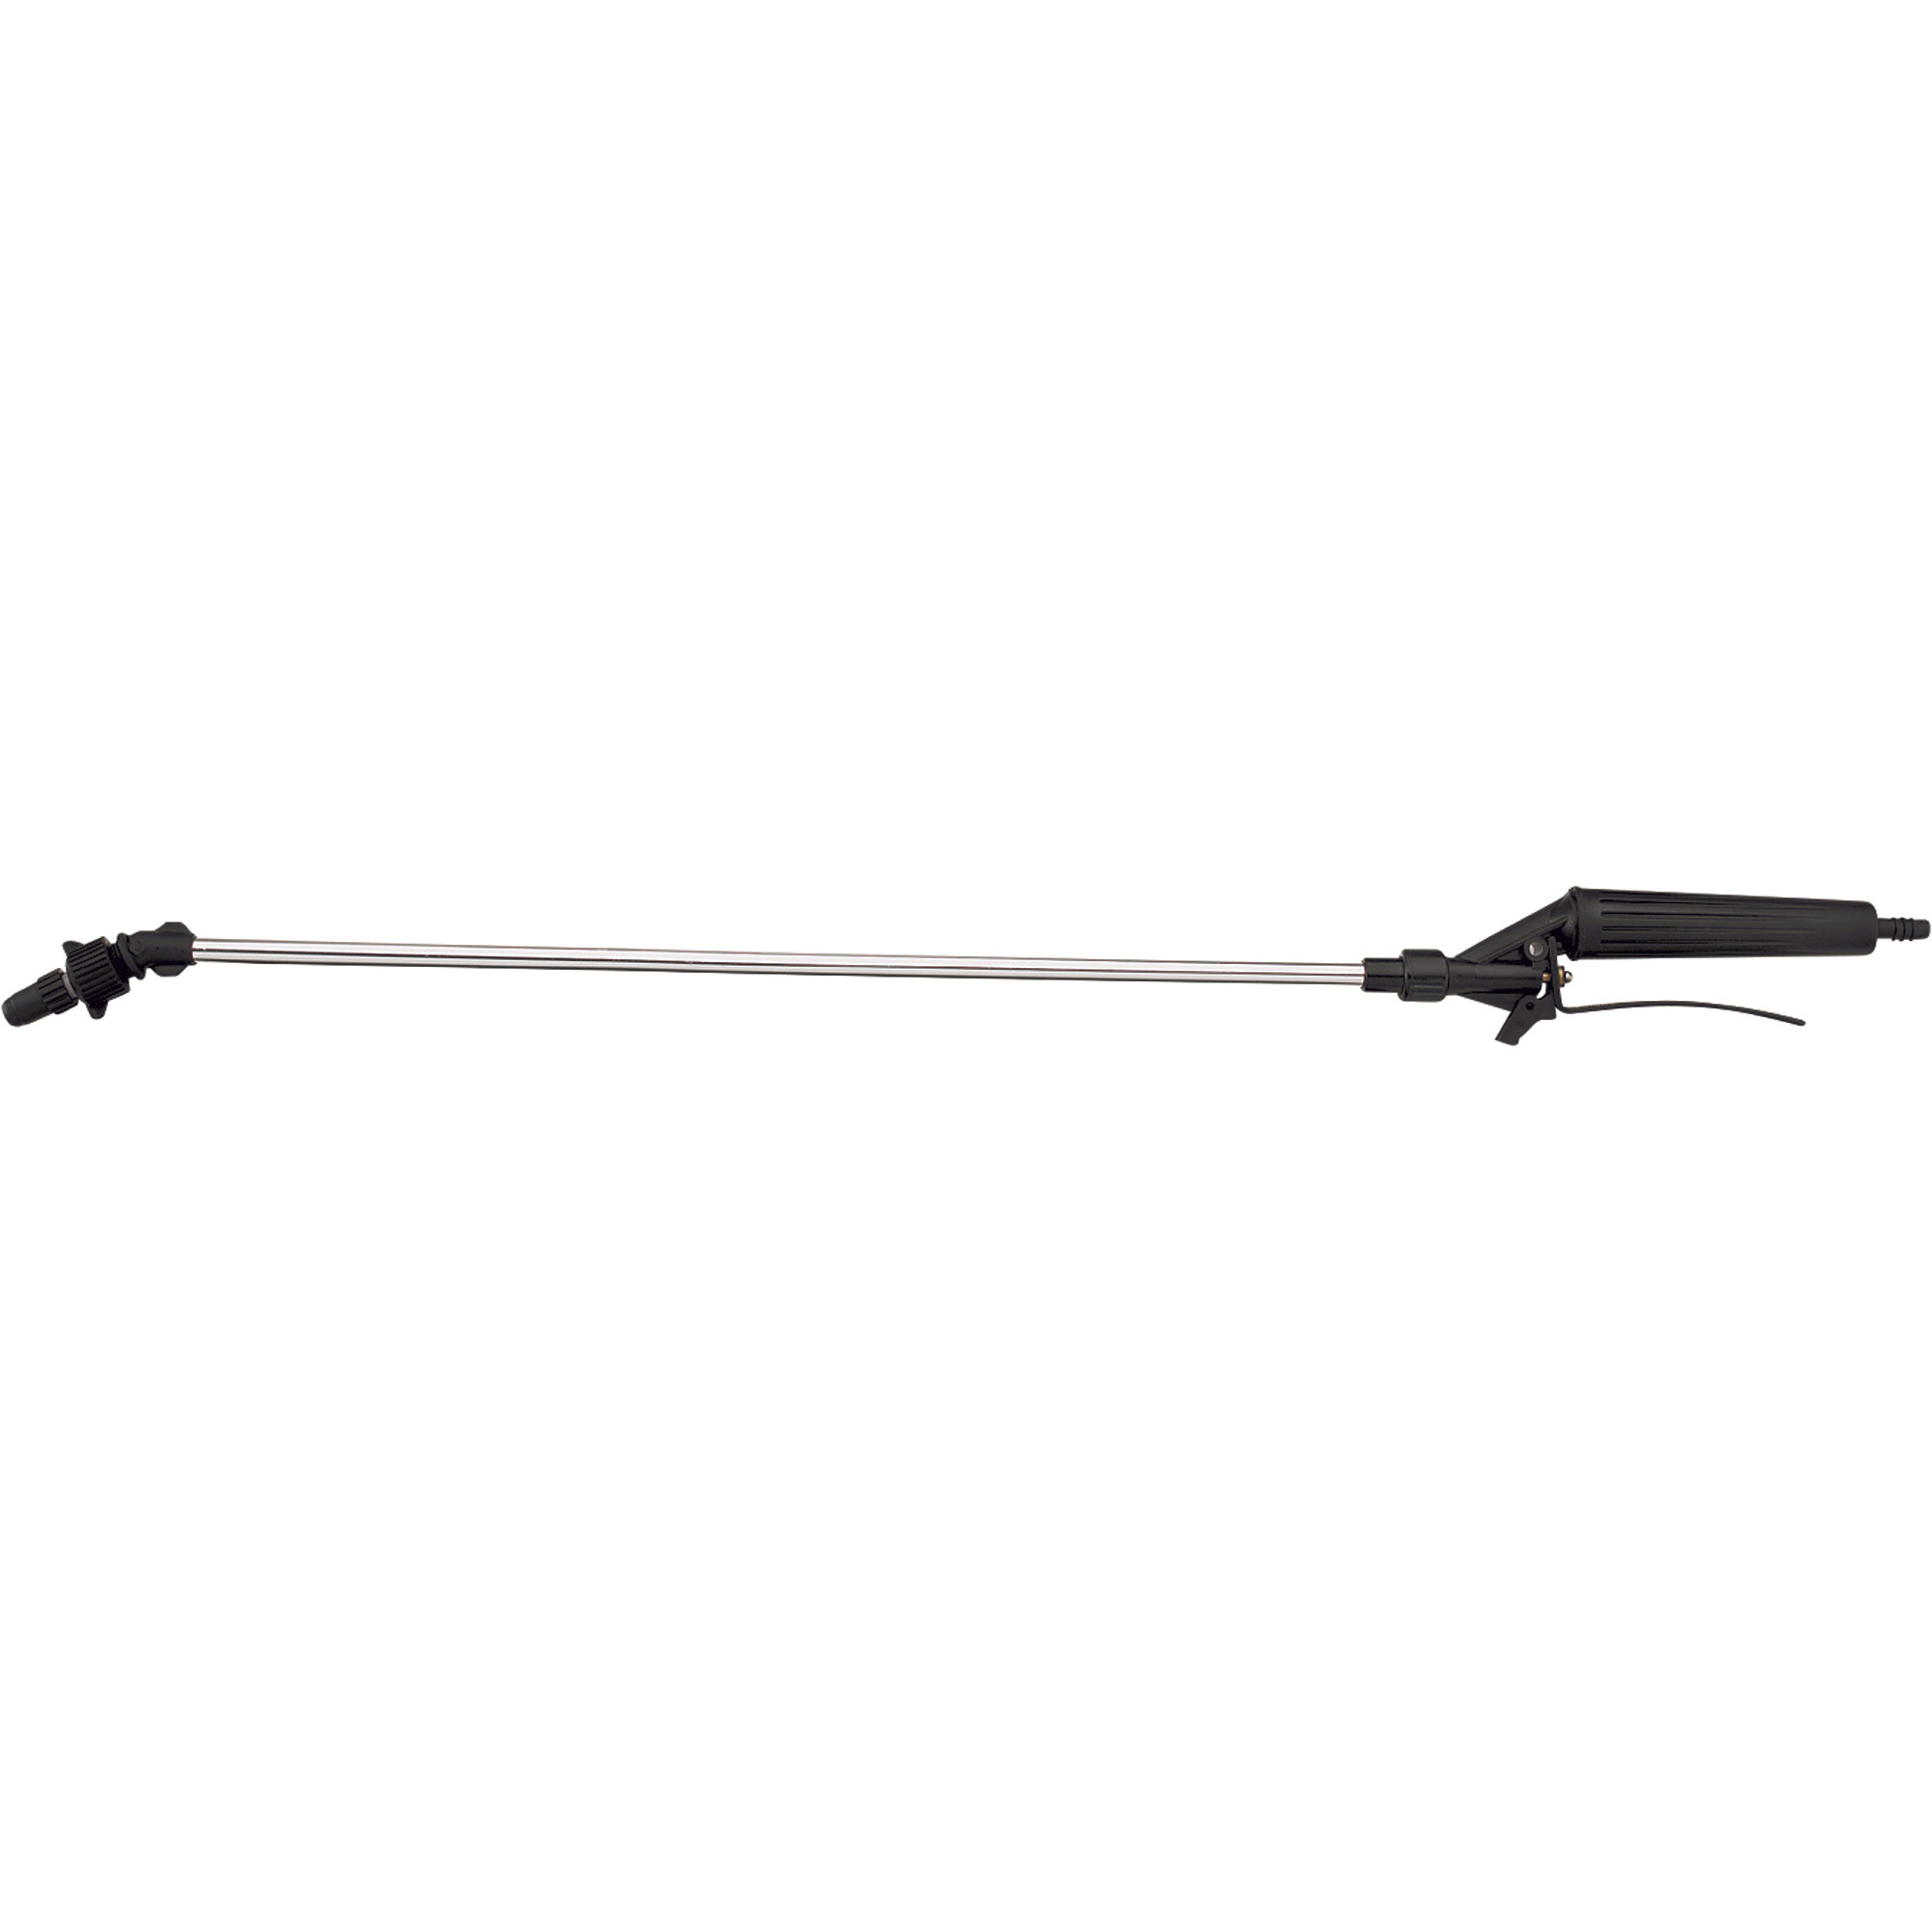 Valley Industries Sprayer Wand, 30Inch, 3 GPM, 150 PSI, Model SG-4507F